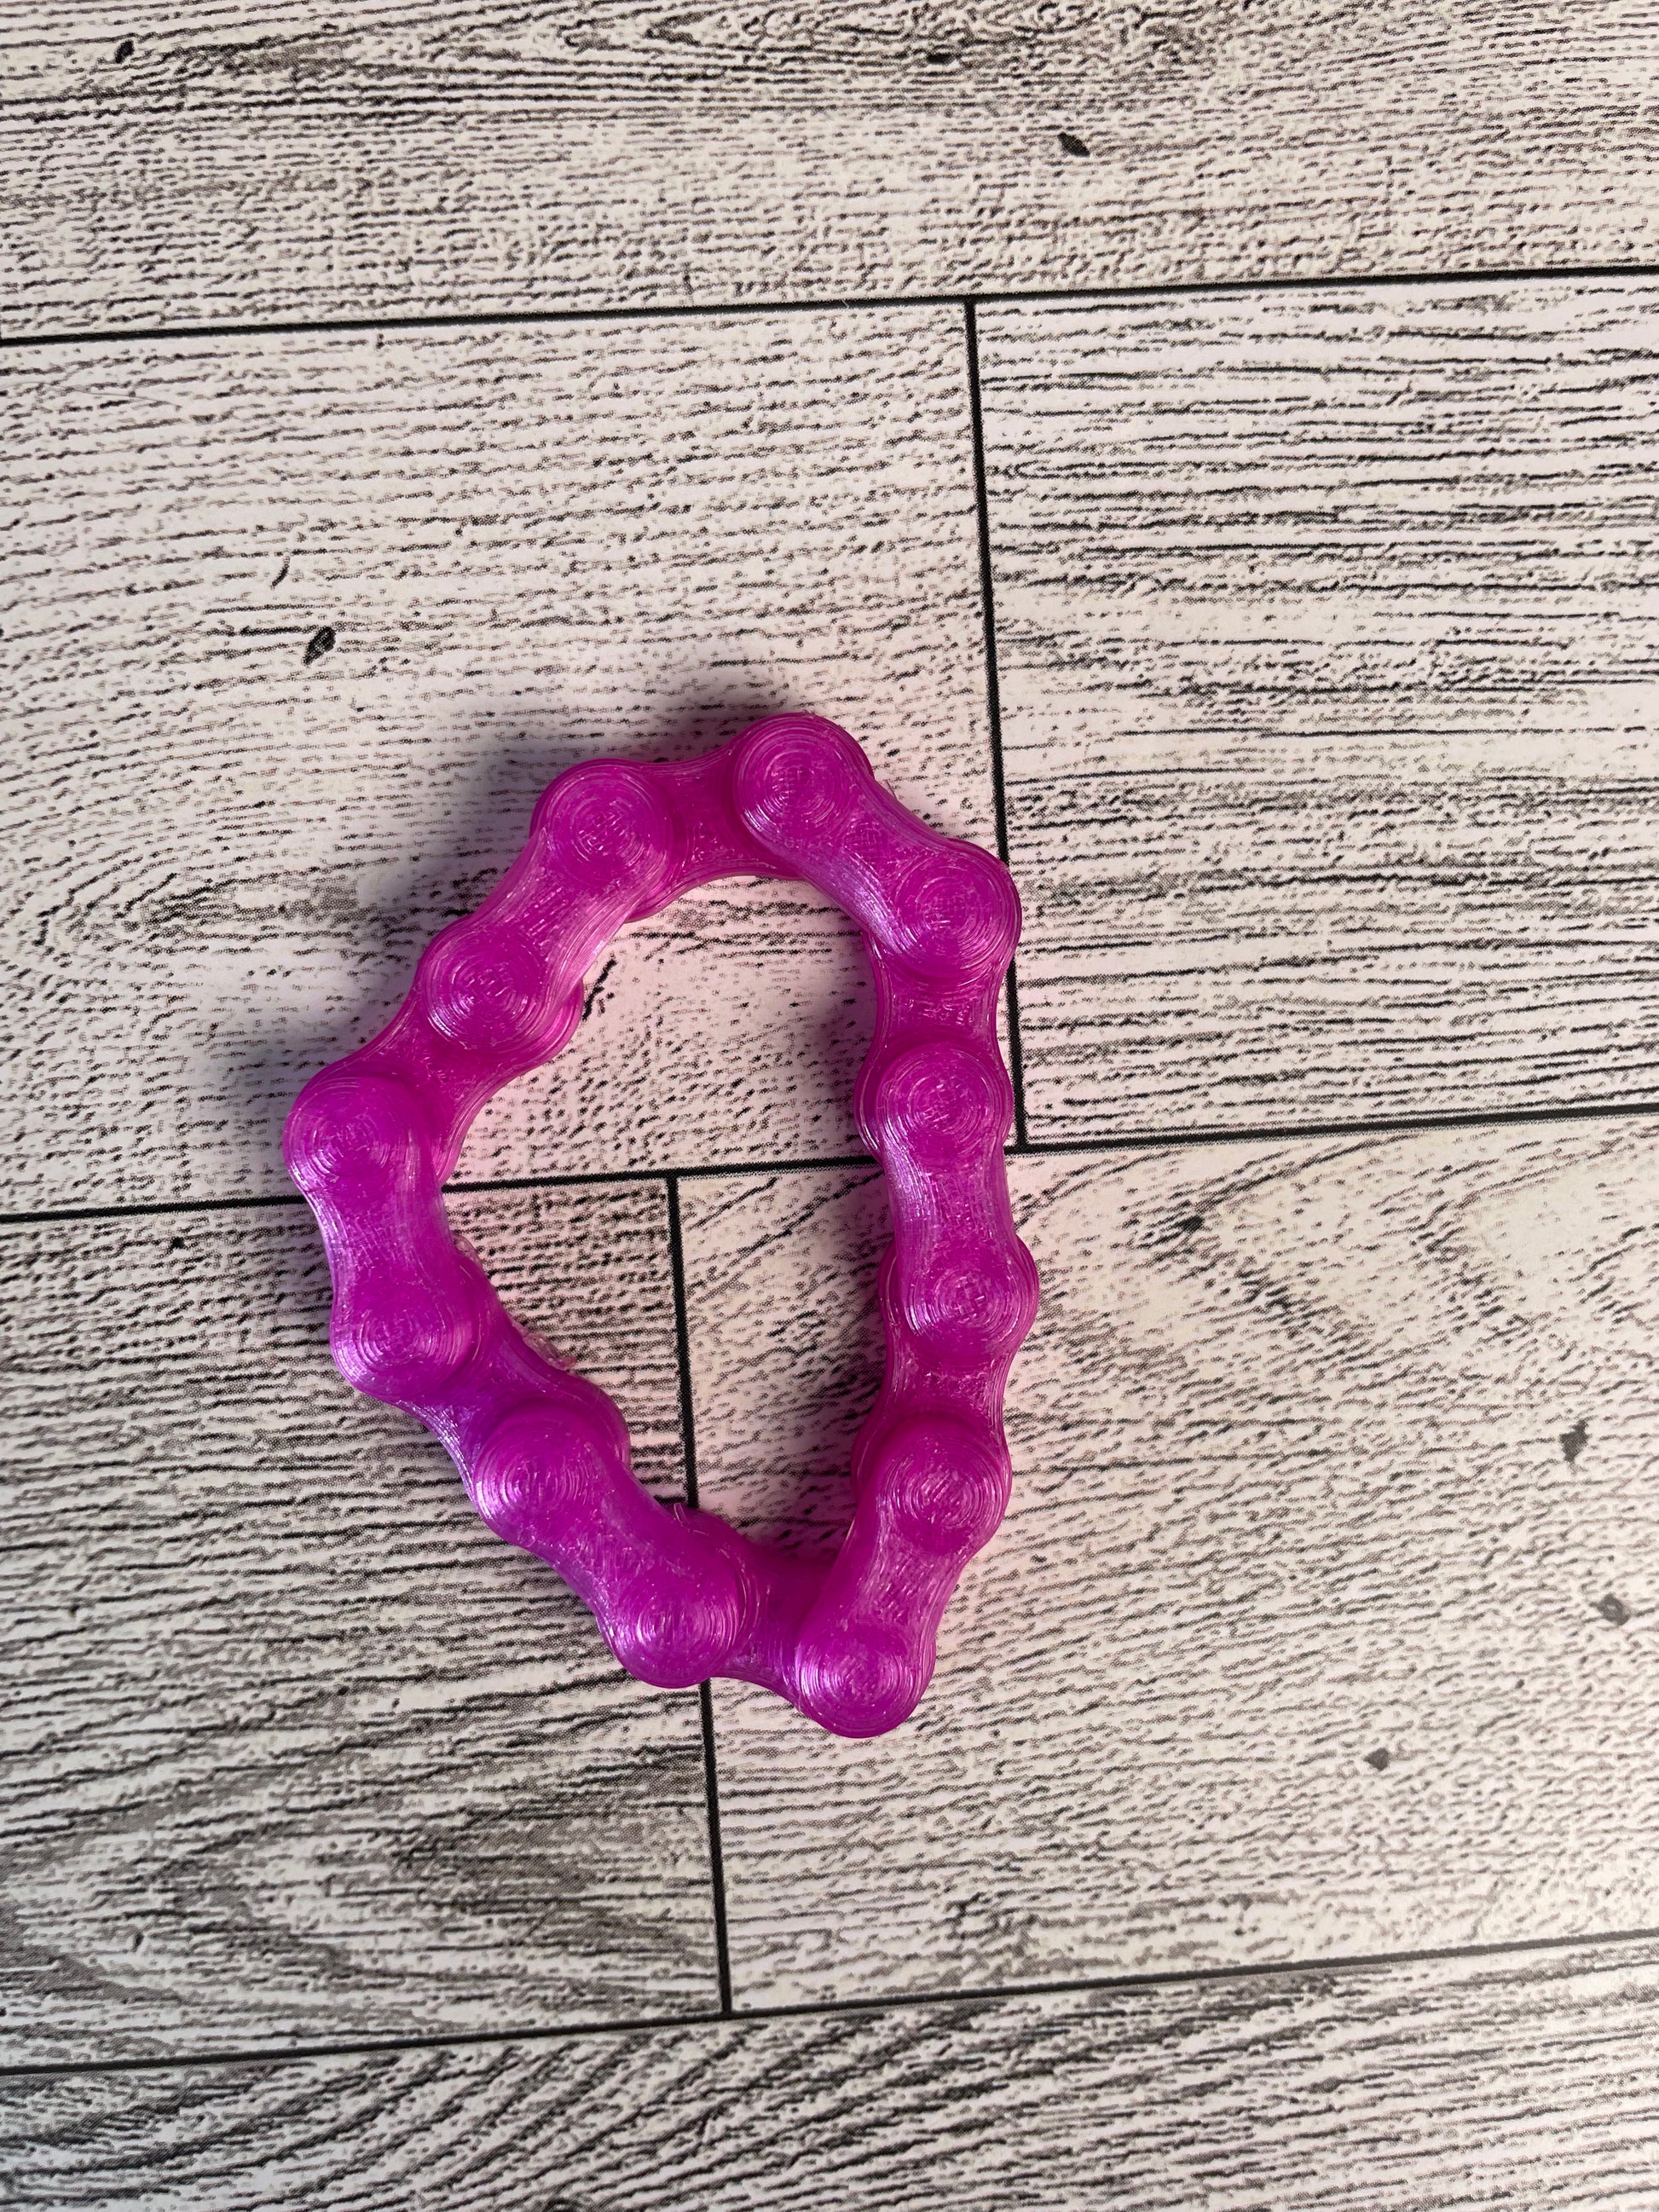 A translucent purple chain link on a wood backdrop. The chain is arranged in a triangle shape and there are six links.